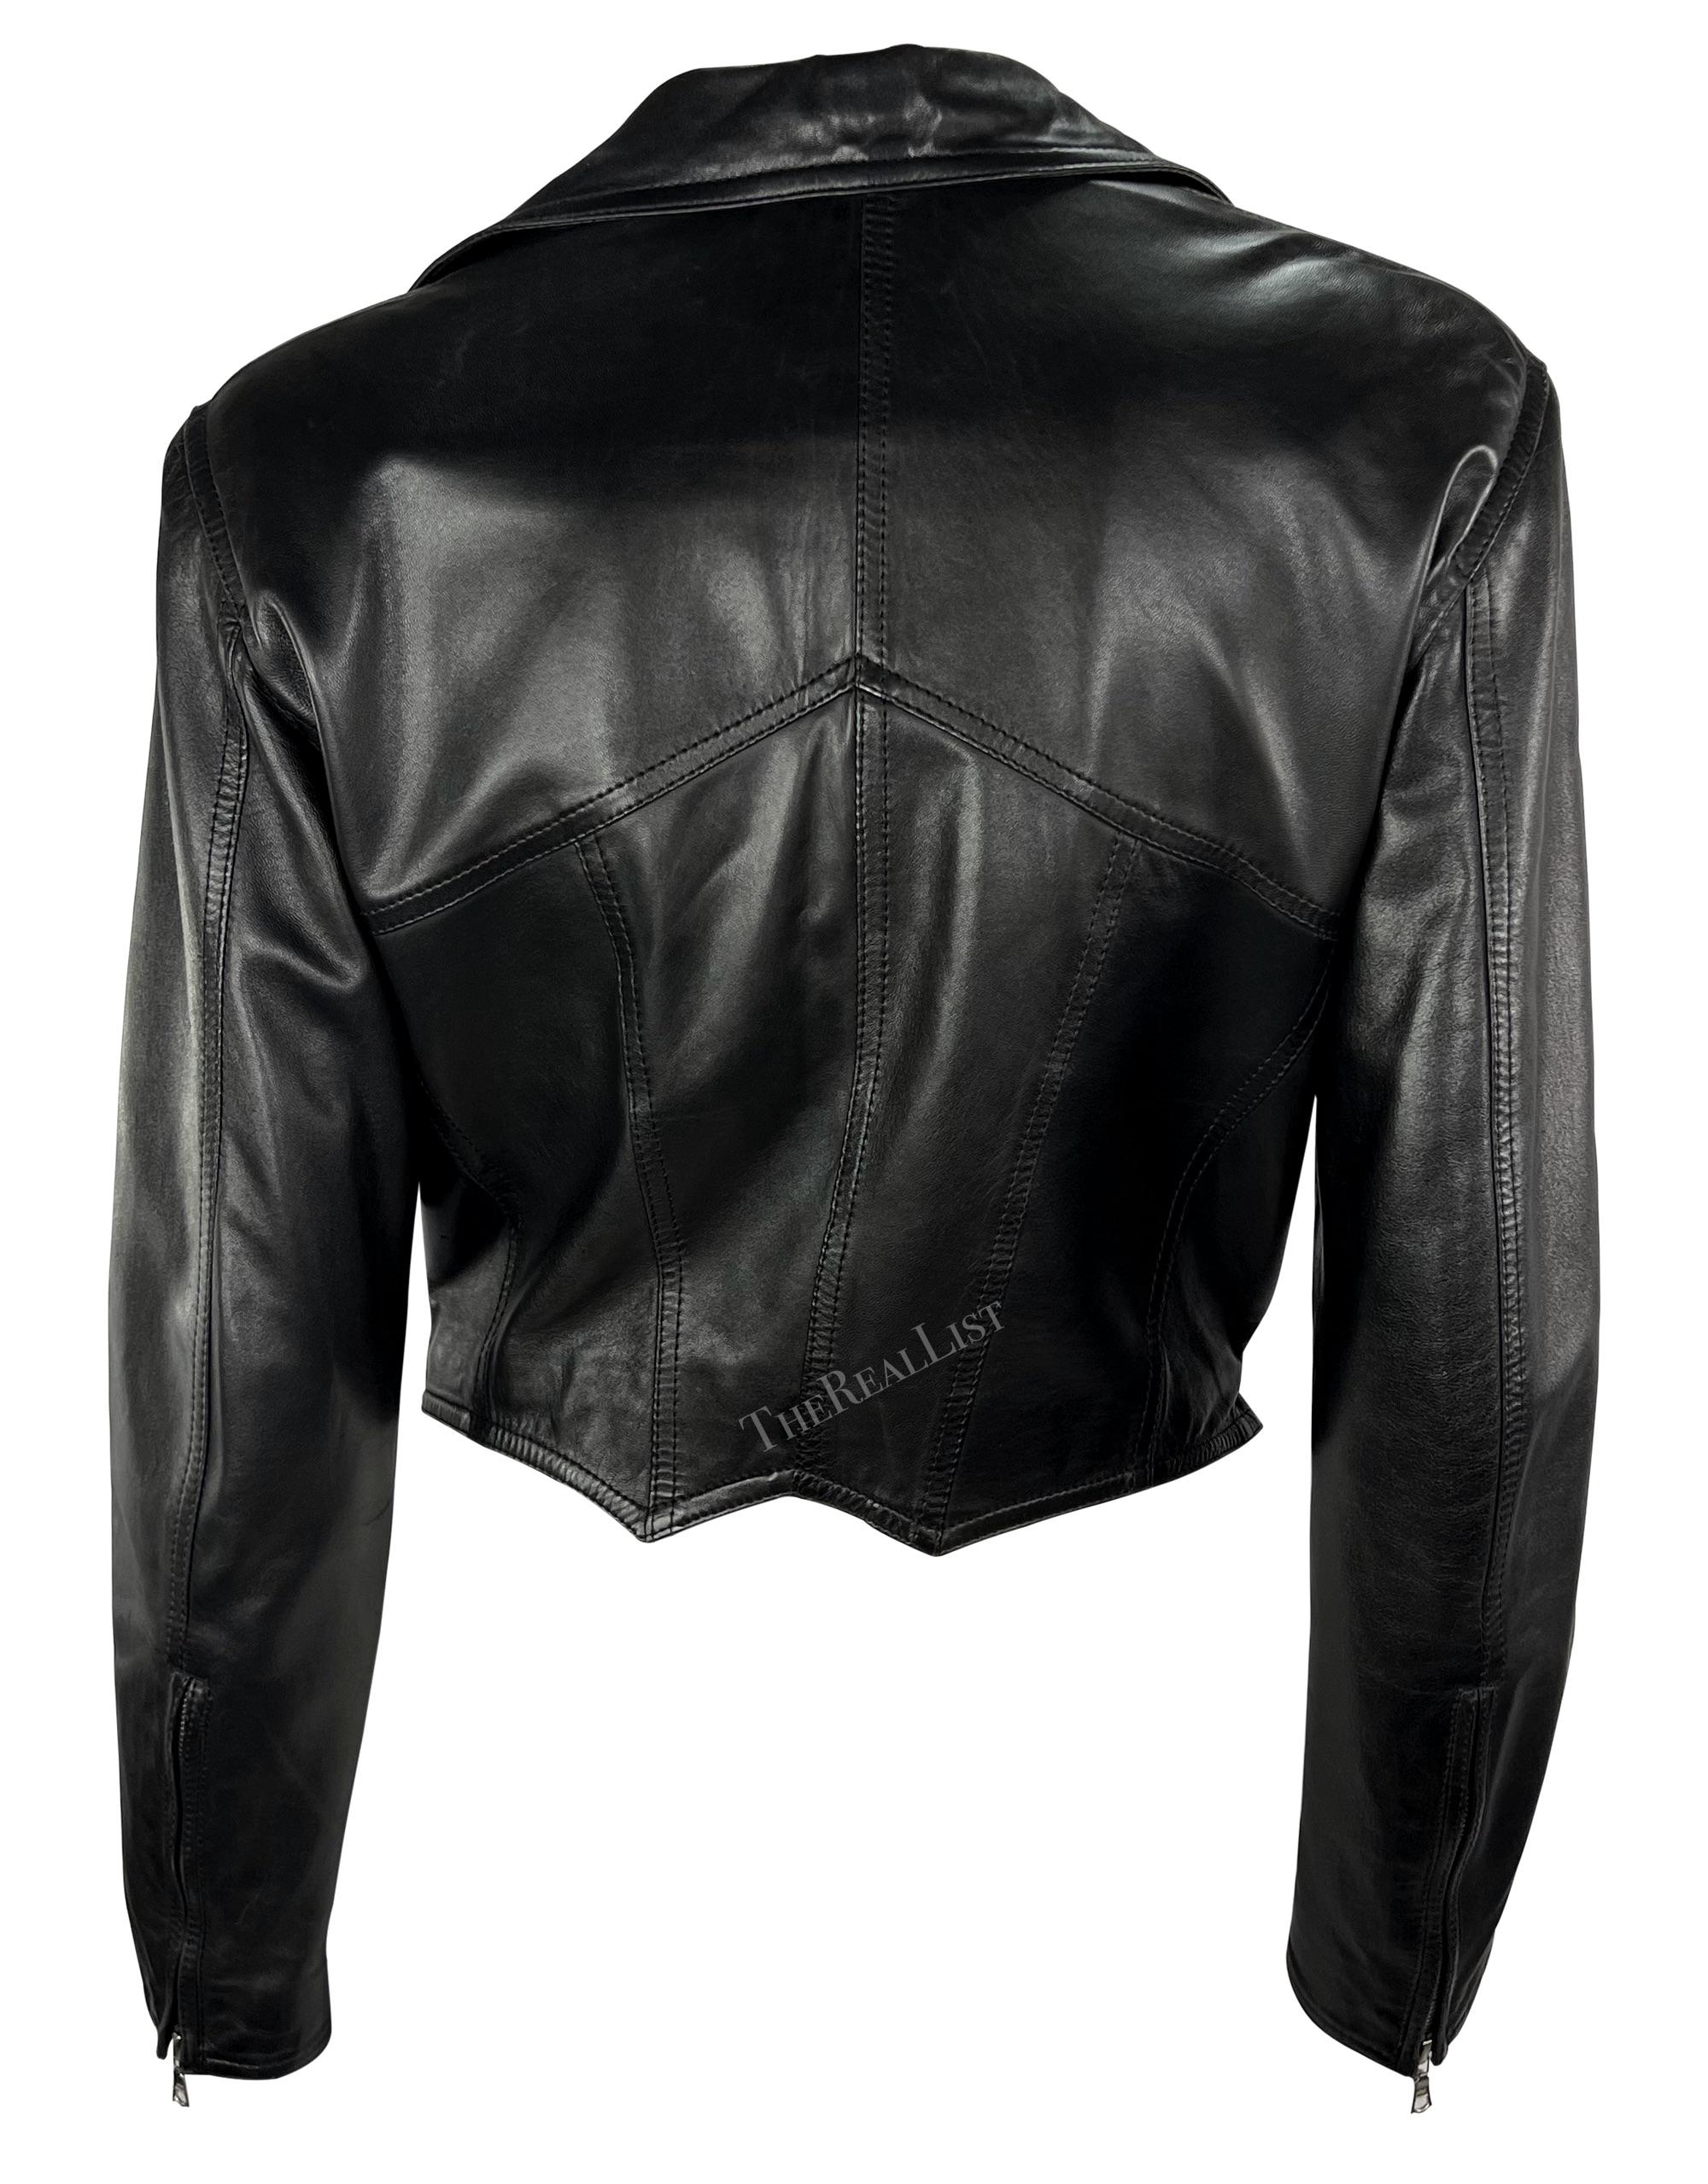 S/S 1995 Gianni Versace Corsetry Style Black Leather Cropped Leather Jacket For Sale 1